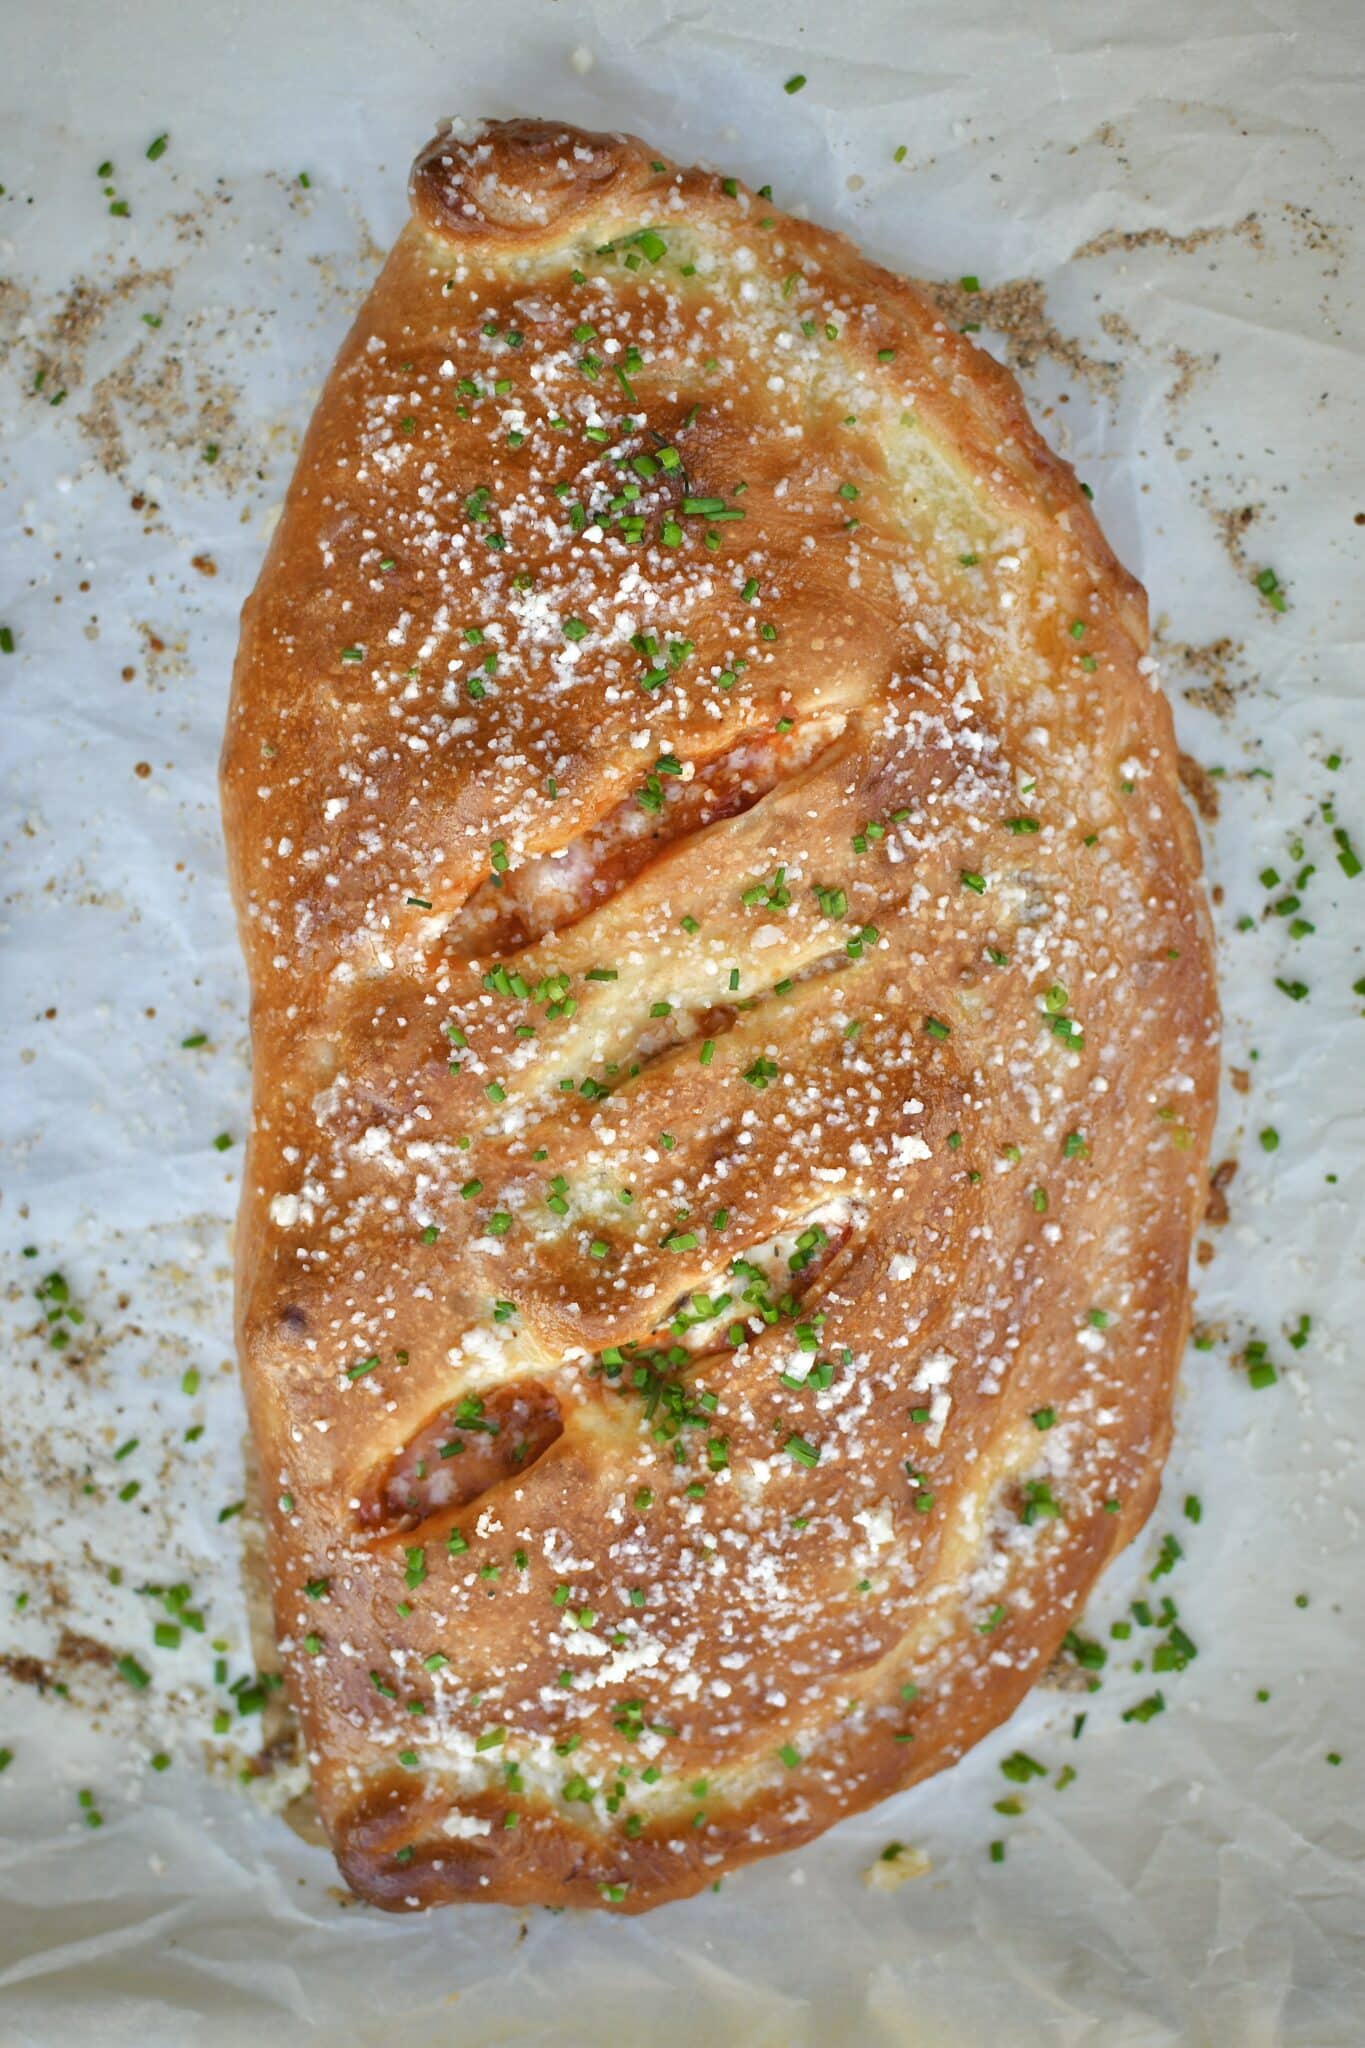 Calzone fresh out of the oven, brushed with garlic butter, and dusted with grated parmesan and chives.